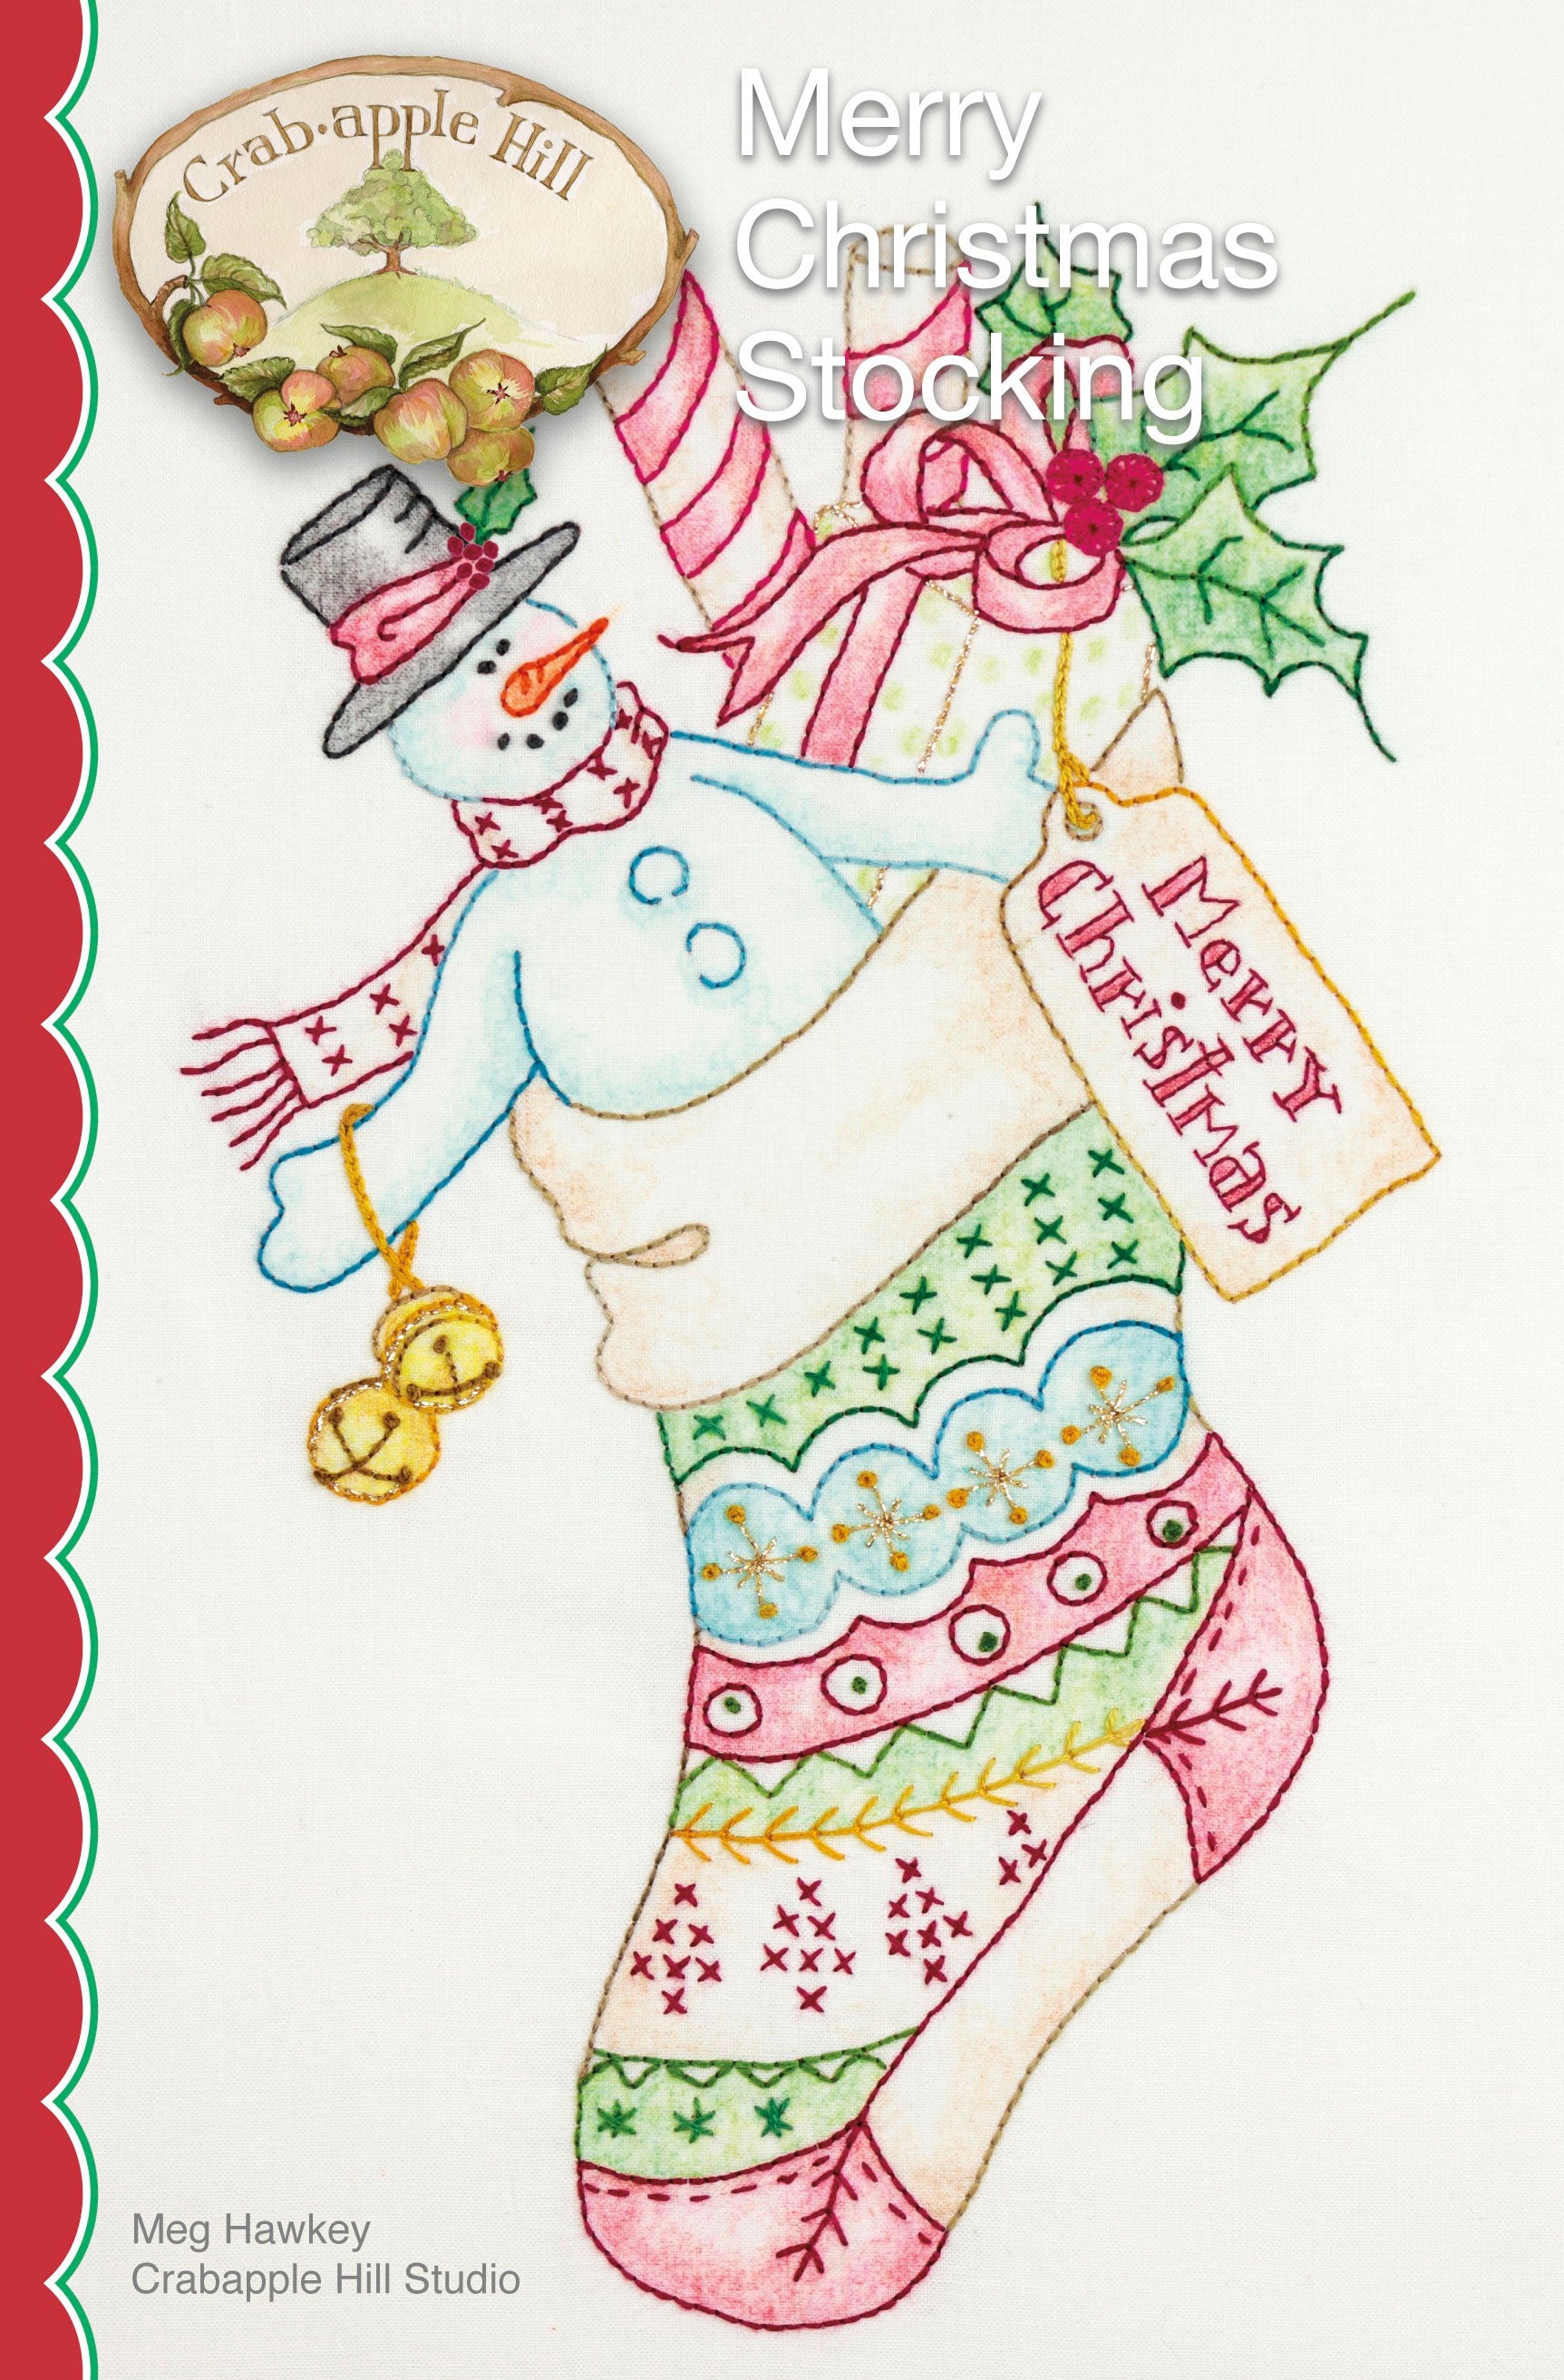 Merry Christmas Stocking Sewing and Embroidery Pattern by Meg Hawkey for Crabapple Hill Studio